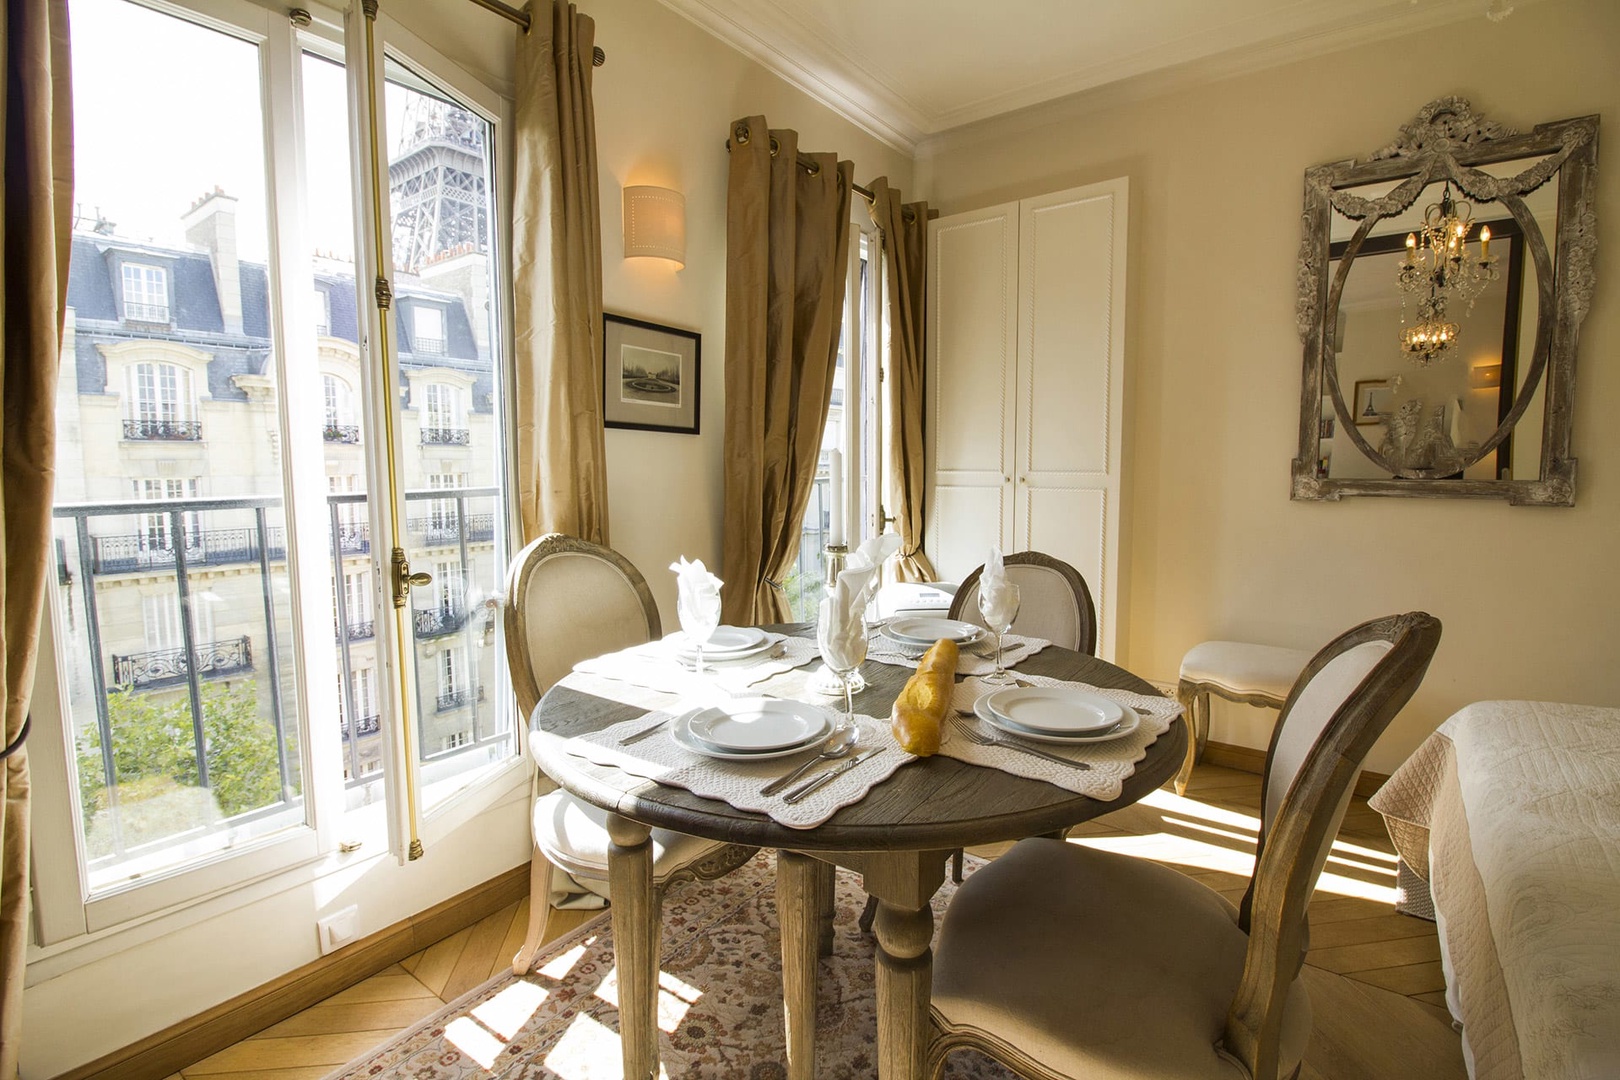 Eat in style at the beautiful dining table with views of Paris!